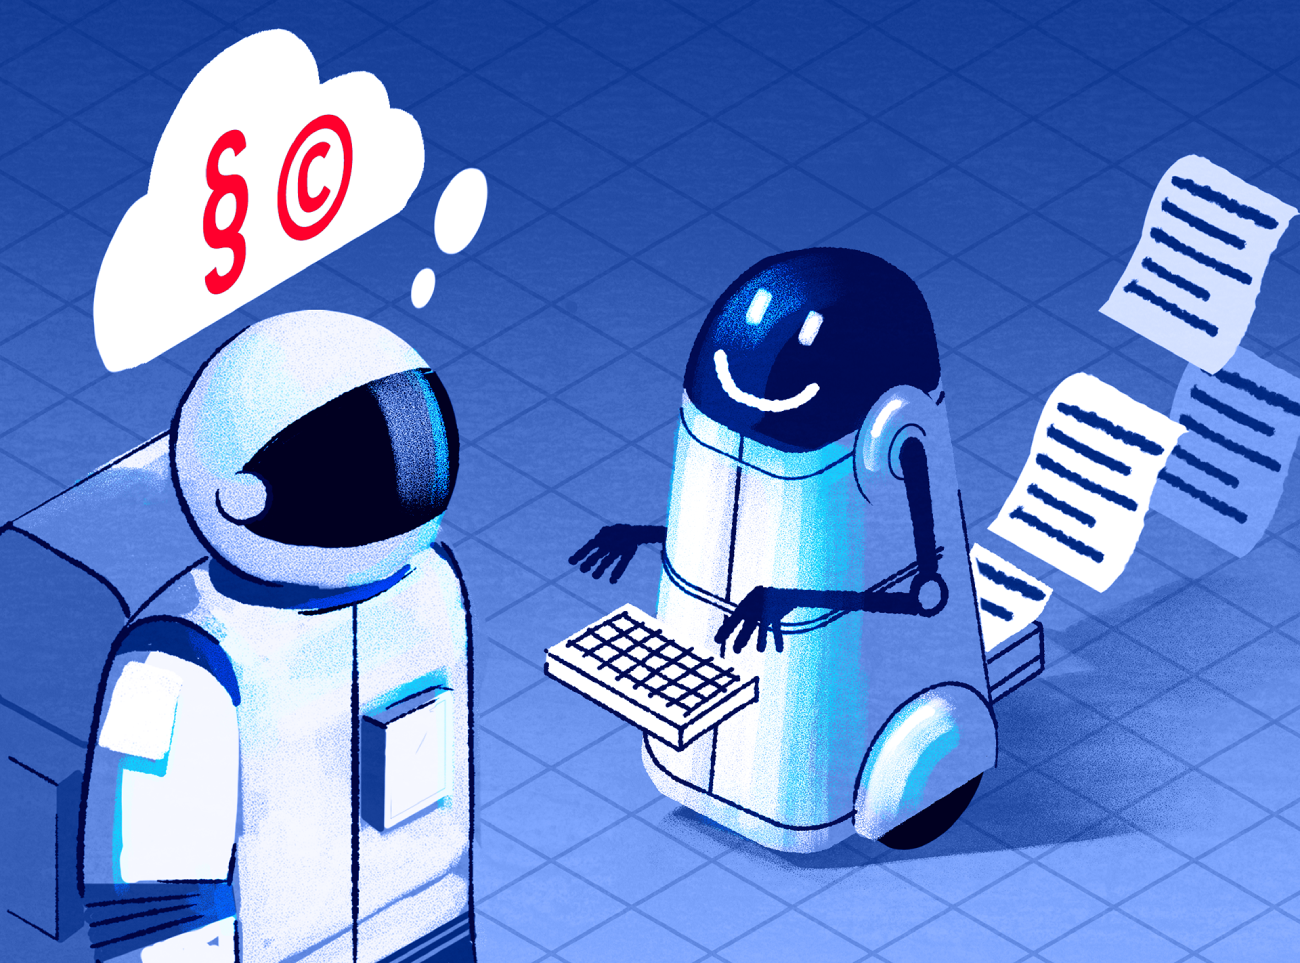 Illustration of a robot producing printed texts and interacting with an astronaut